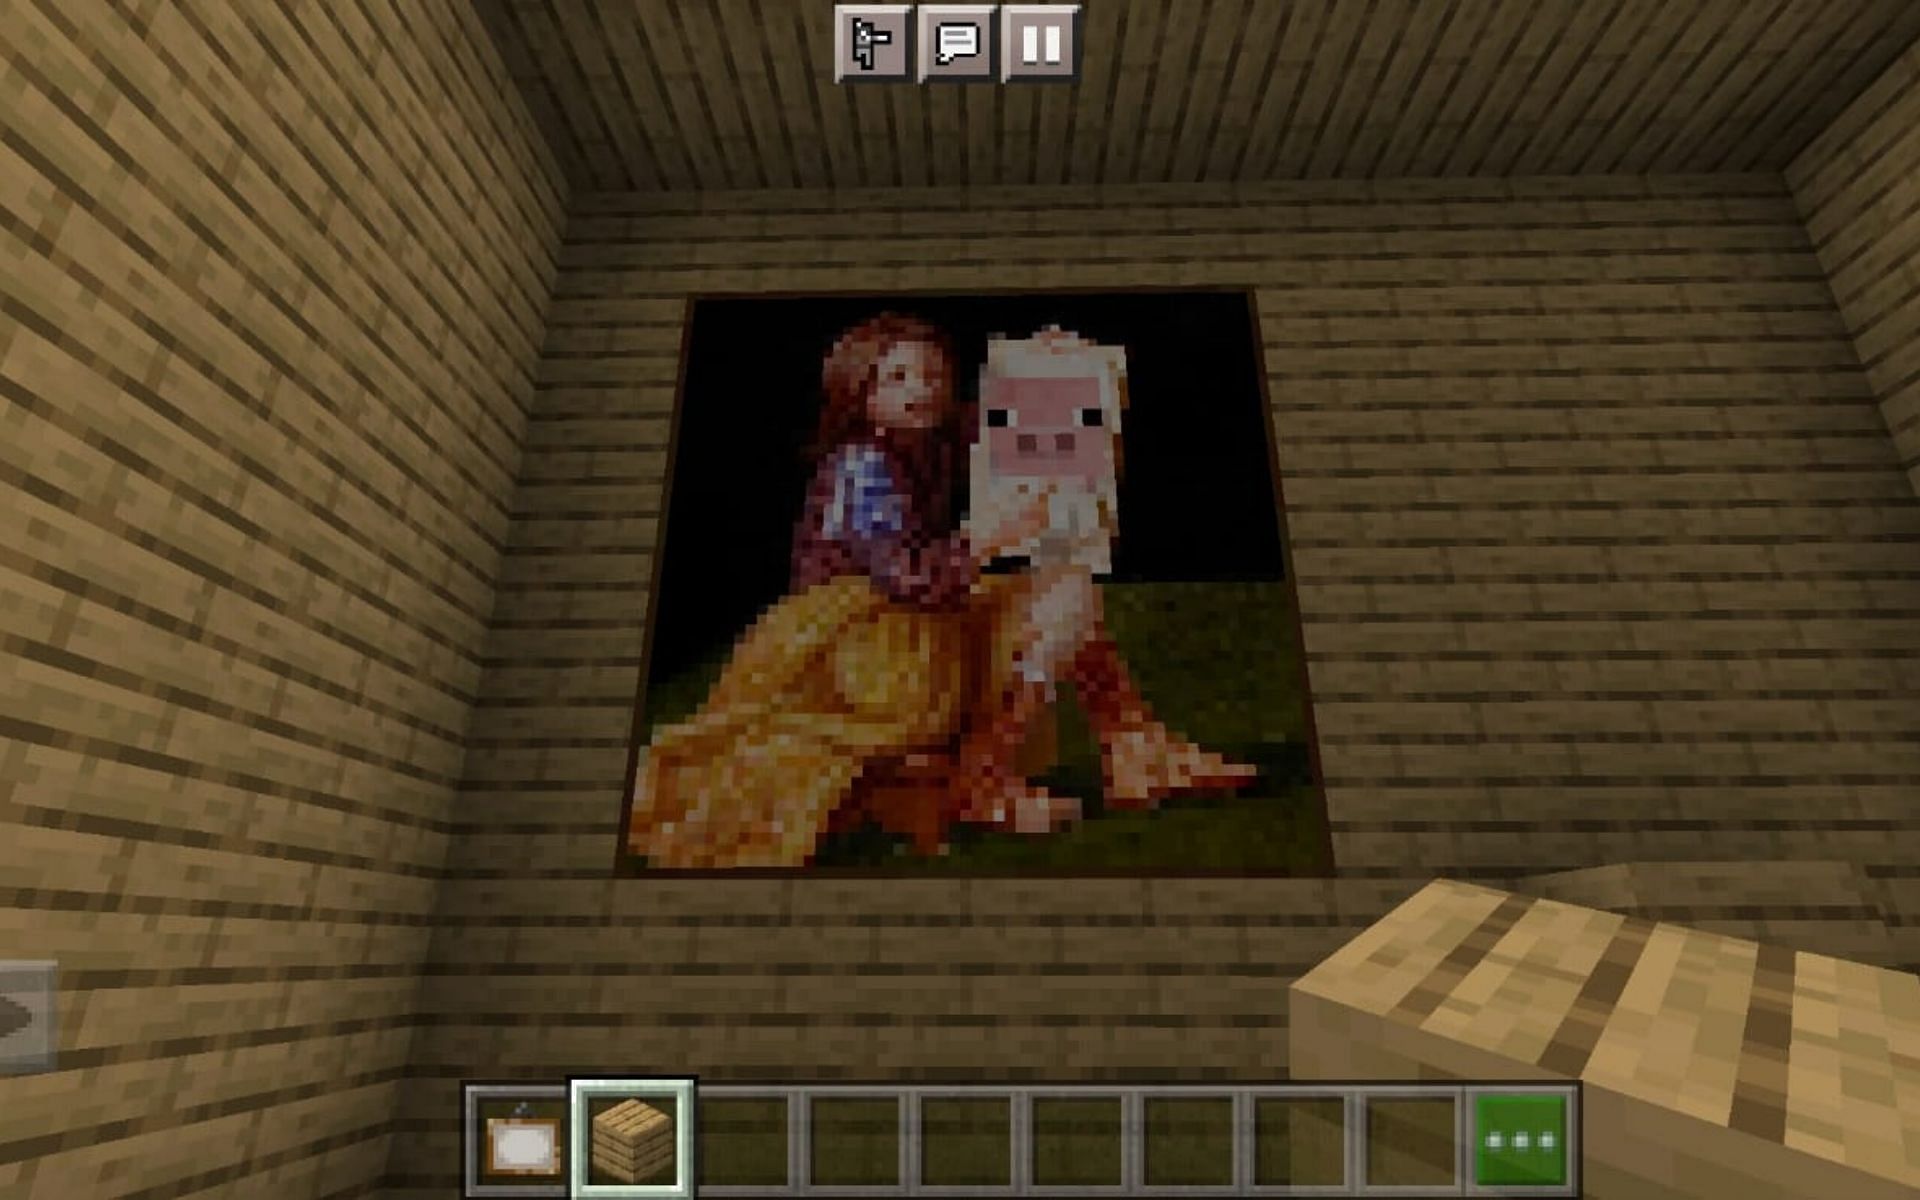 The Pigscene Painting has been placed on the wall (Image via Minecraft)